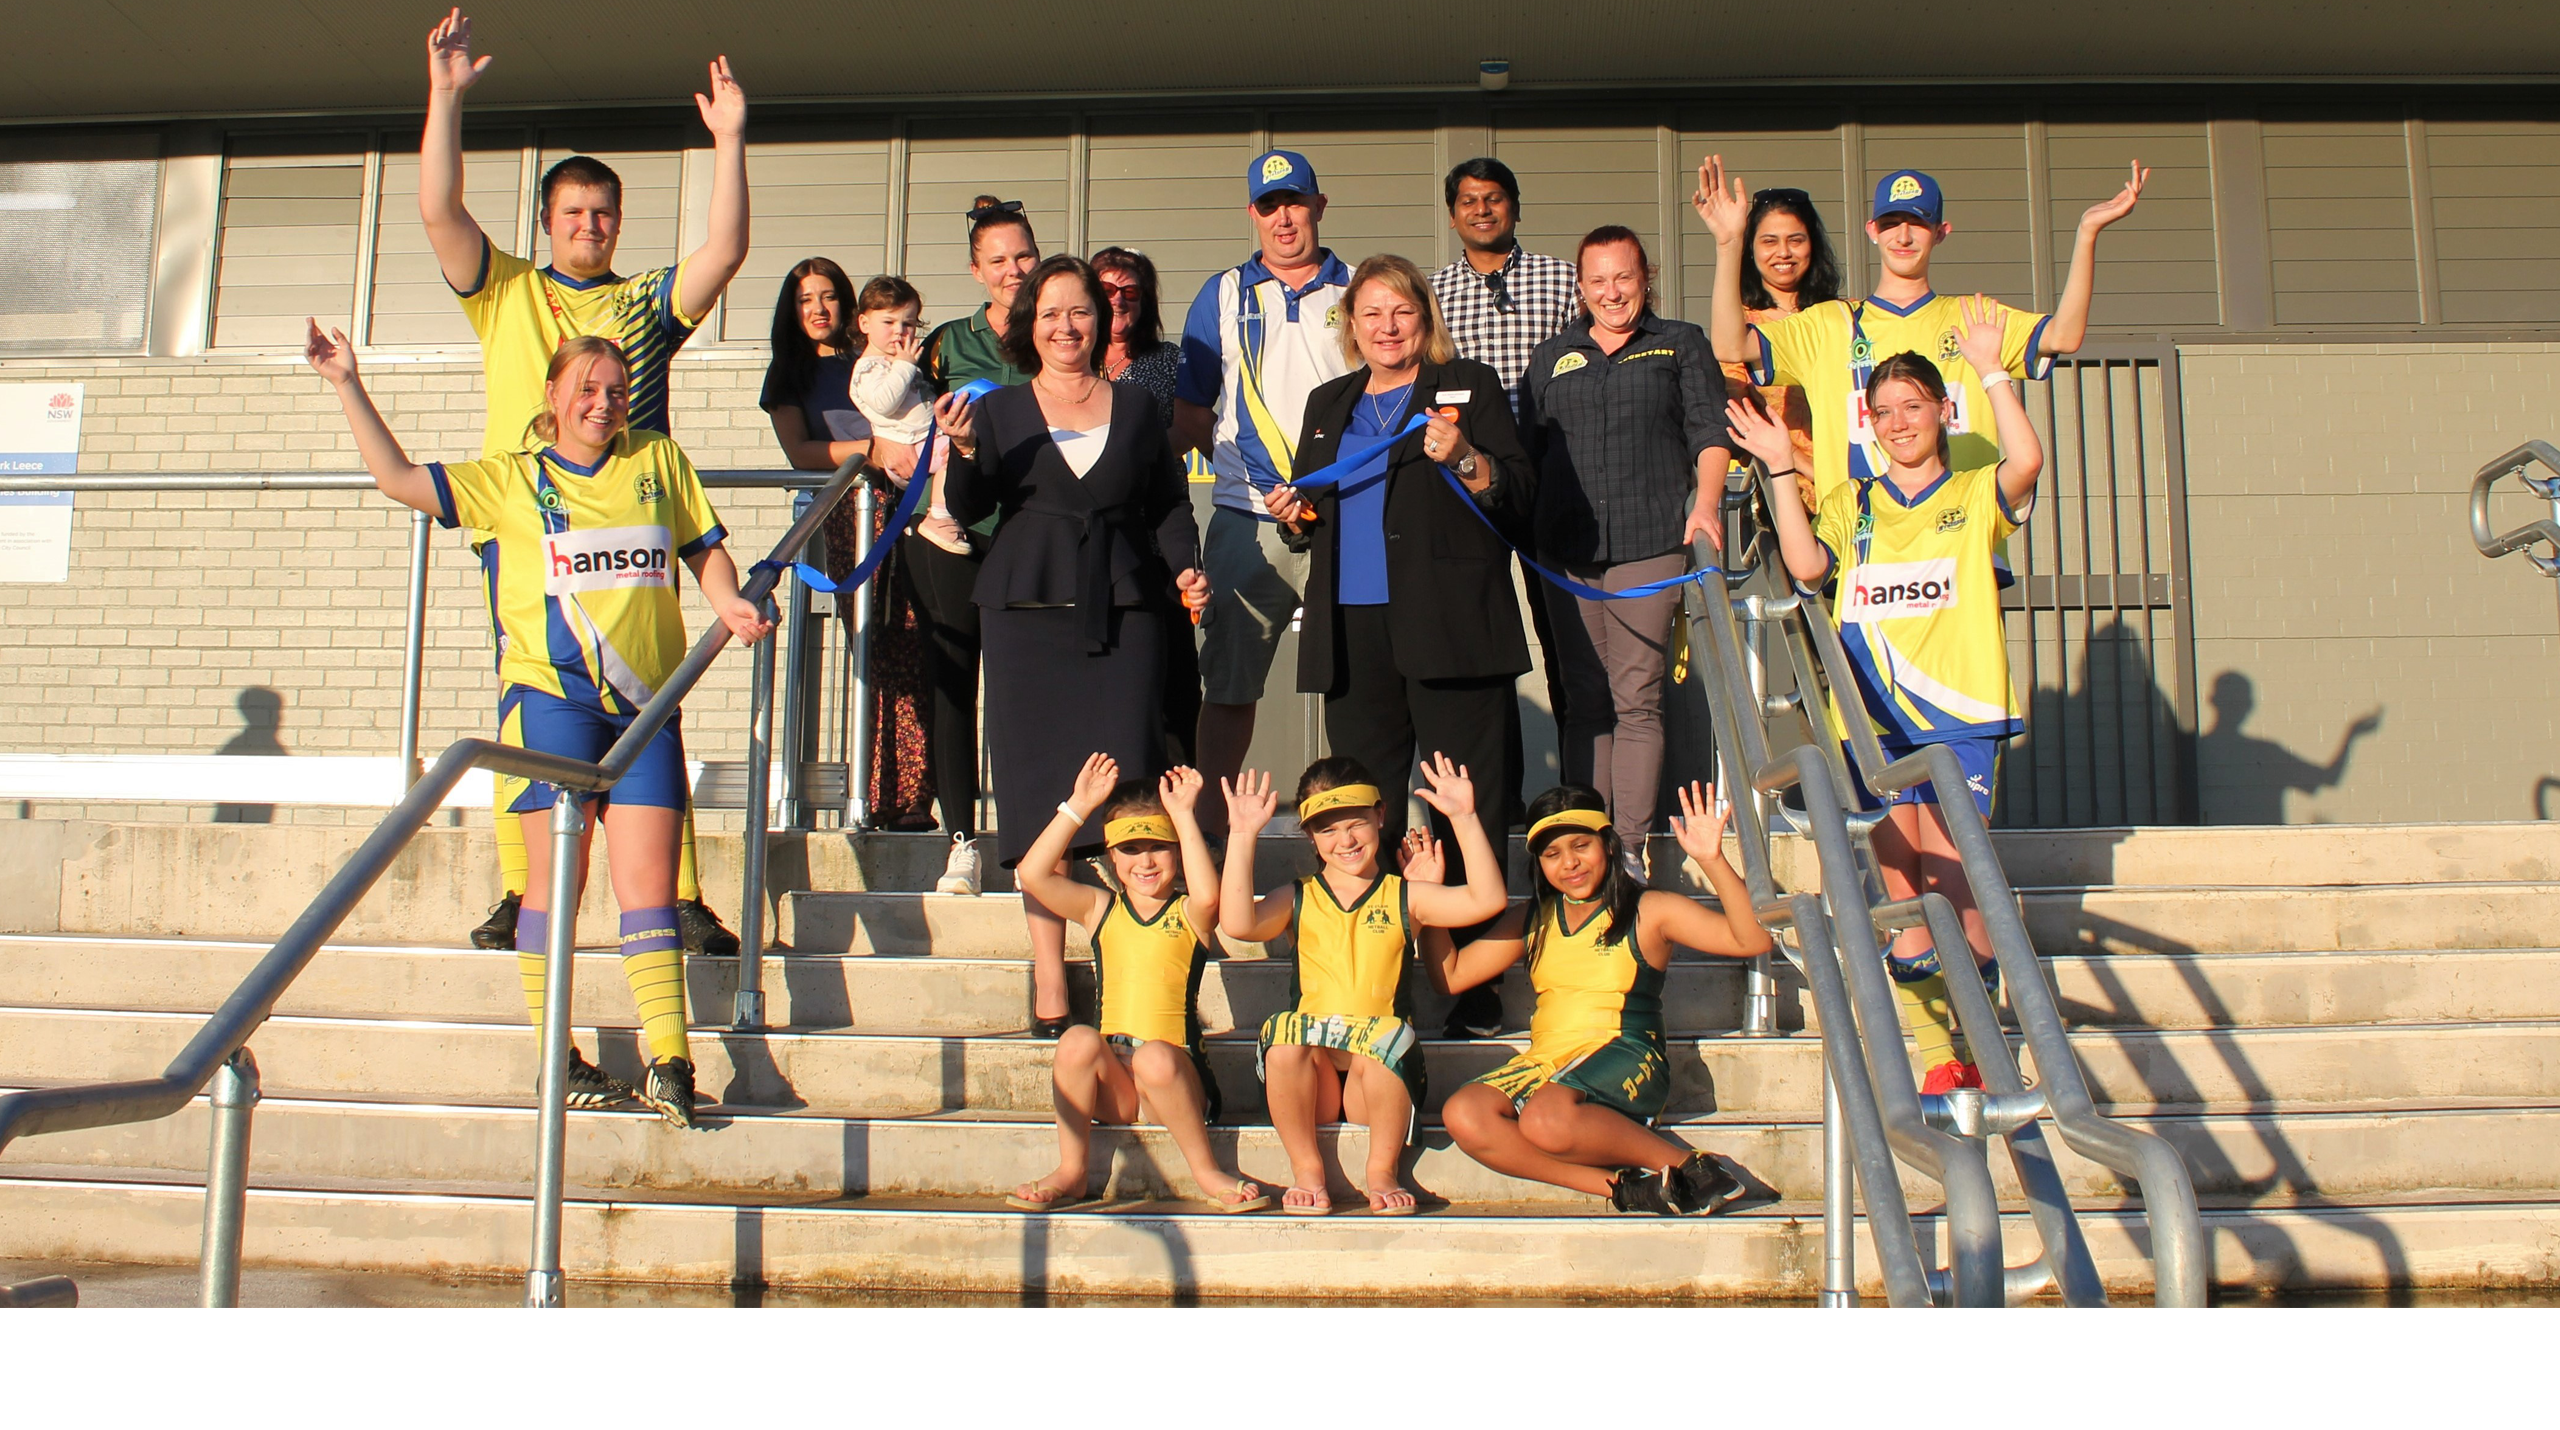 Penrith Mayor Tricia Hitchen and Tanya Davies MP celebrate the opening of the new amenities building at Mark Leece Oval in St Clair with representatives and players from St Clair United Soccer Club and St Clair Netball Club.